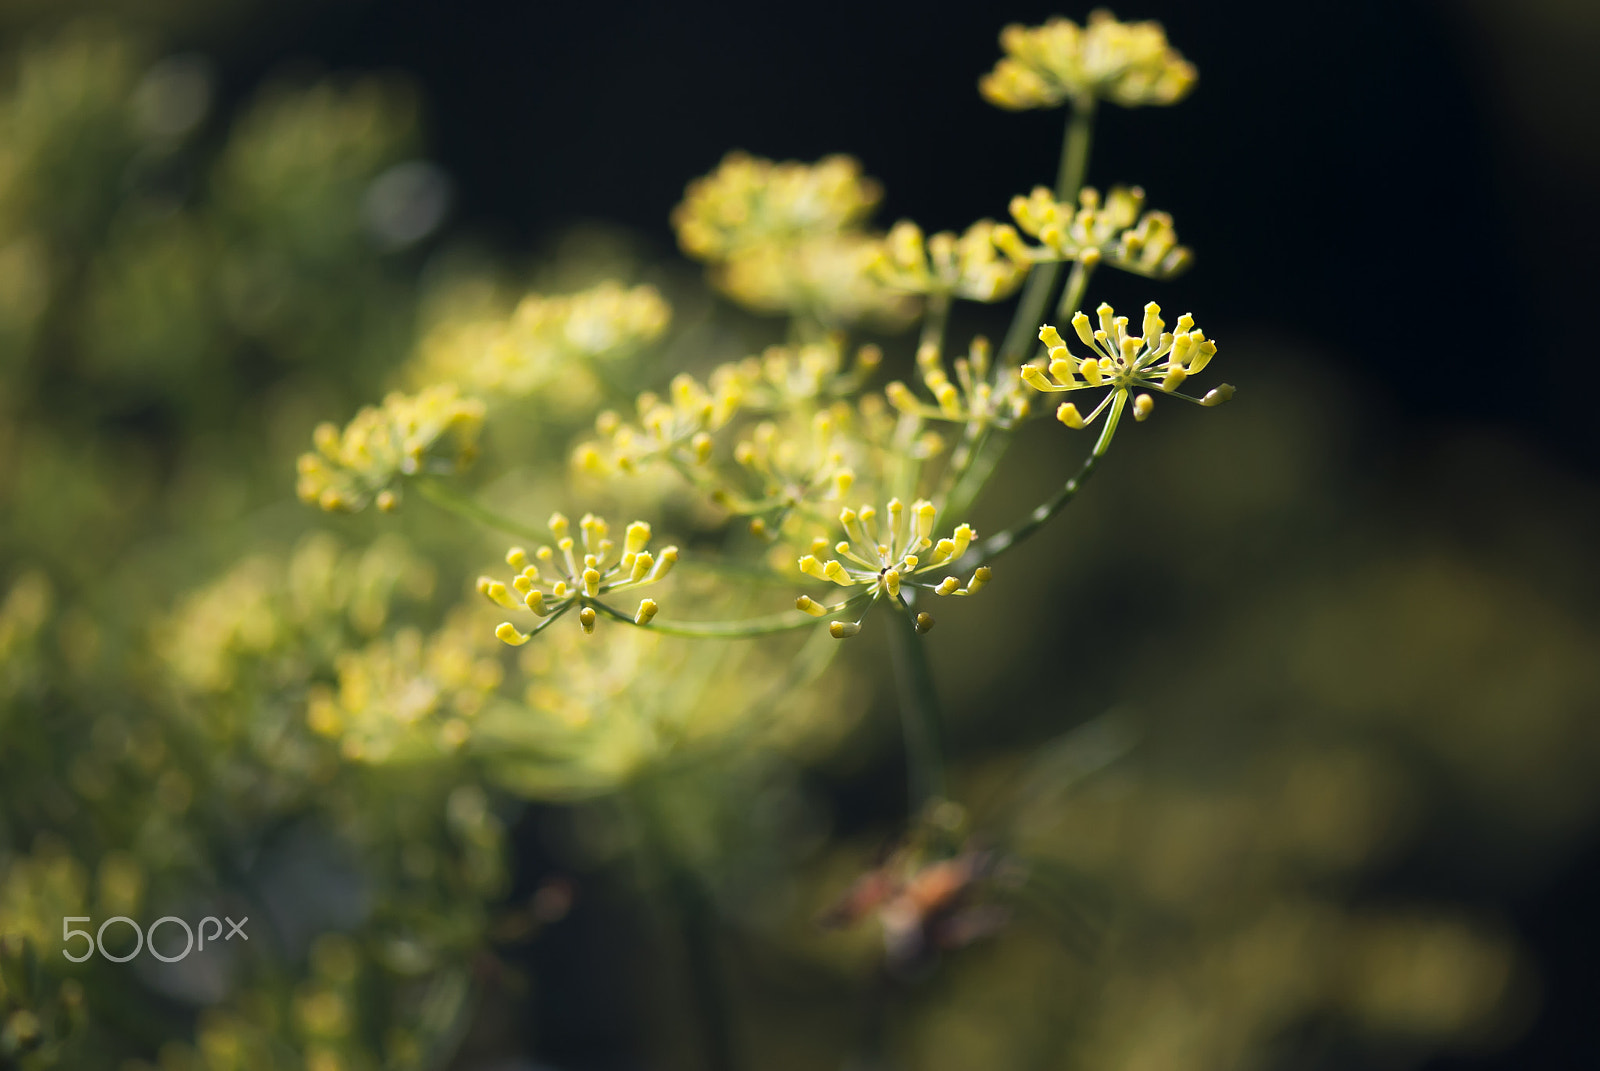 Nikon D60 + Nikon AF-S Micro-Nikkor 105mm F2.8G IF-ED VR sample photo. Dill flower buds photography